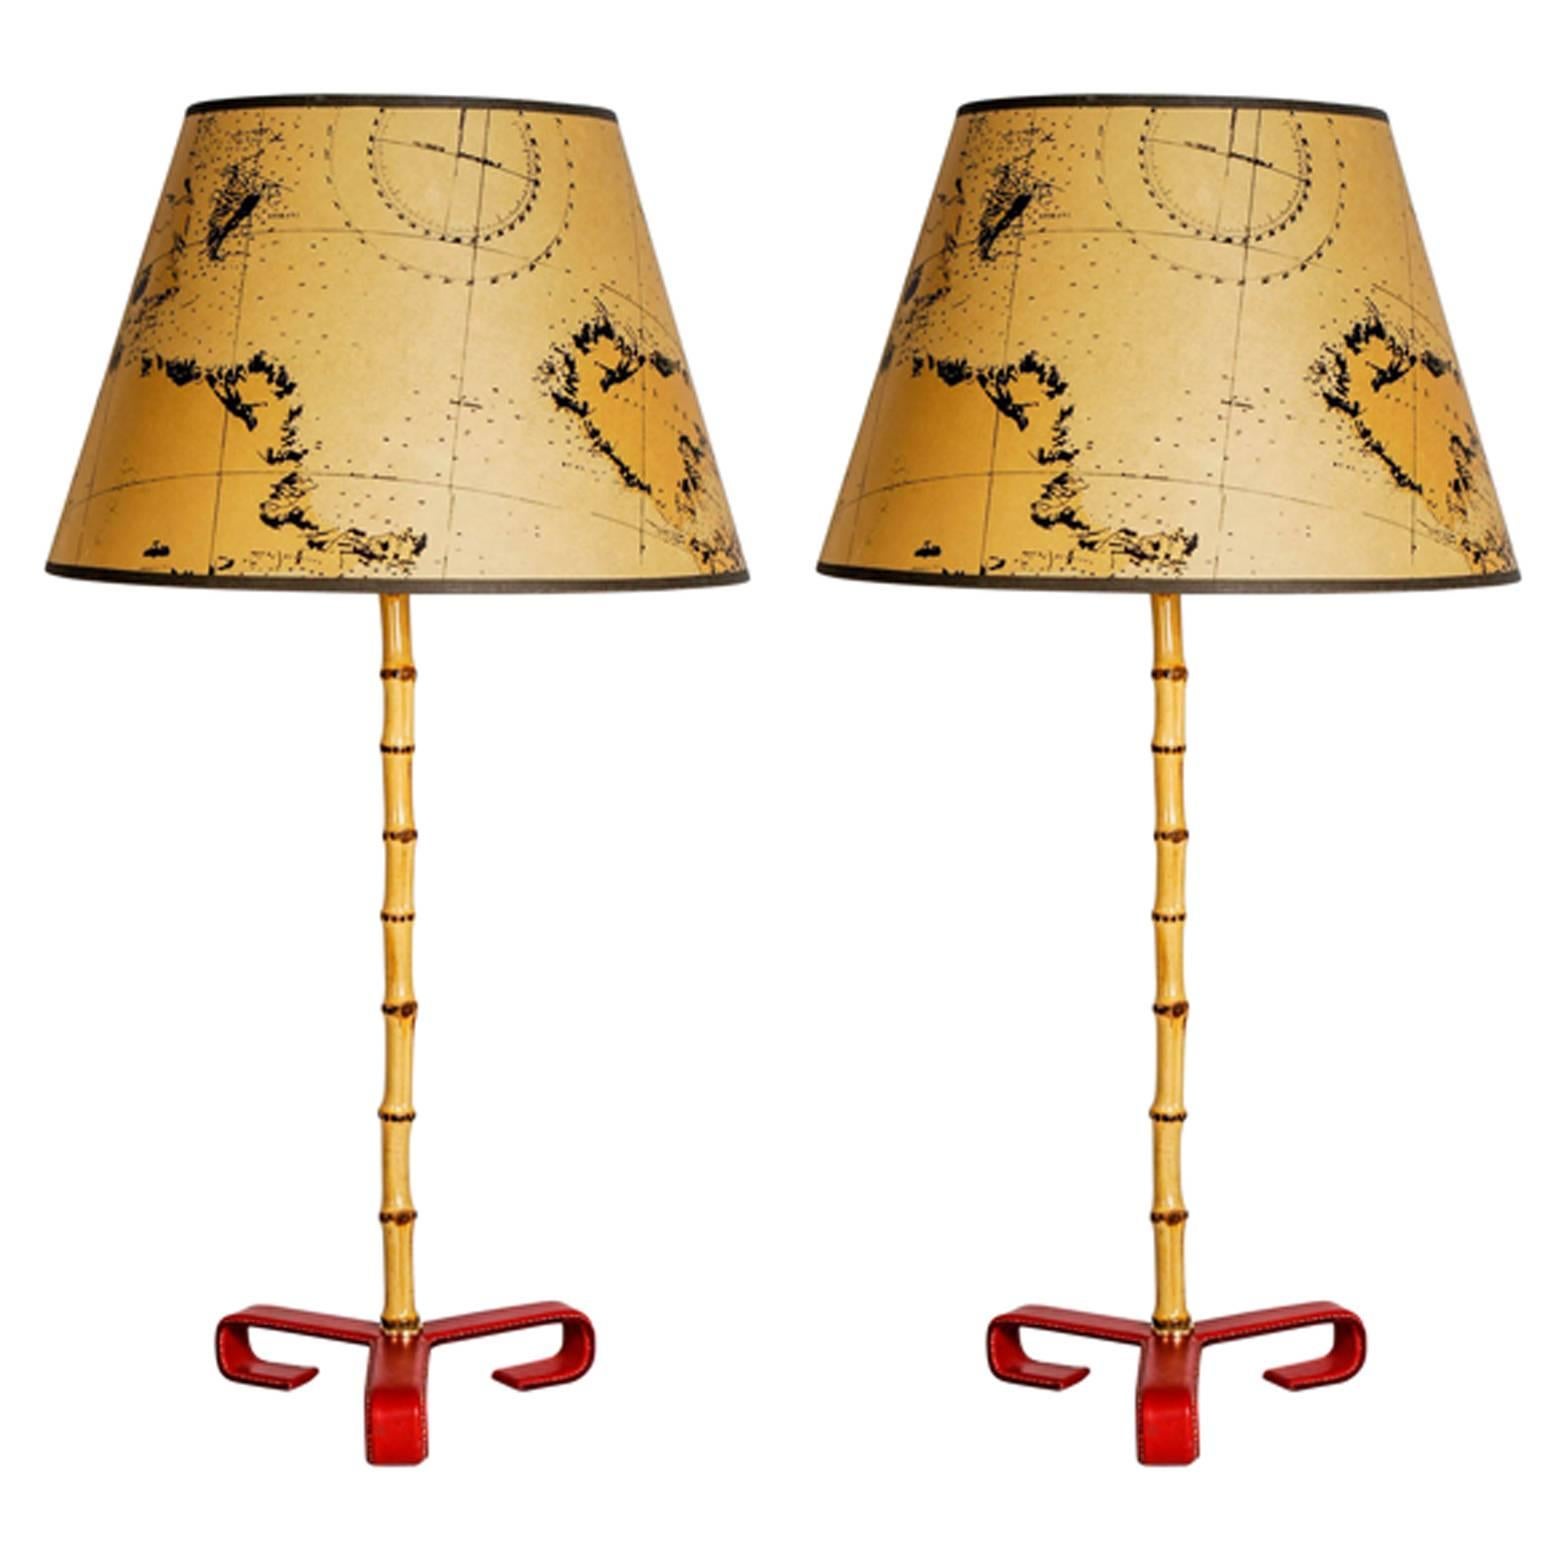 Pair of Stitched Leather Lamp by Jacques Adnet